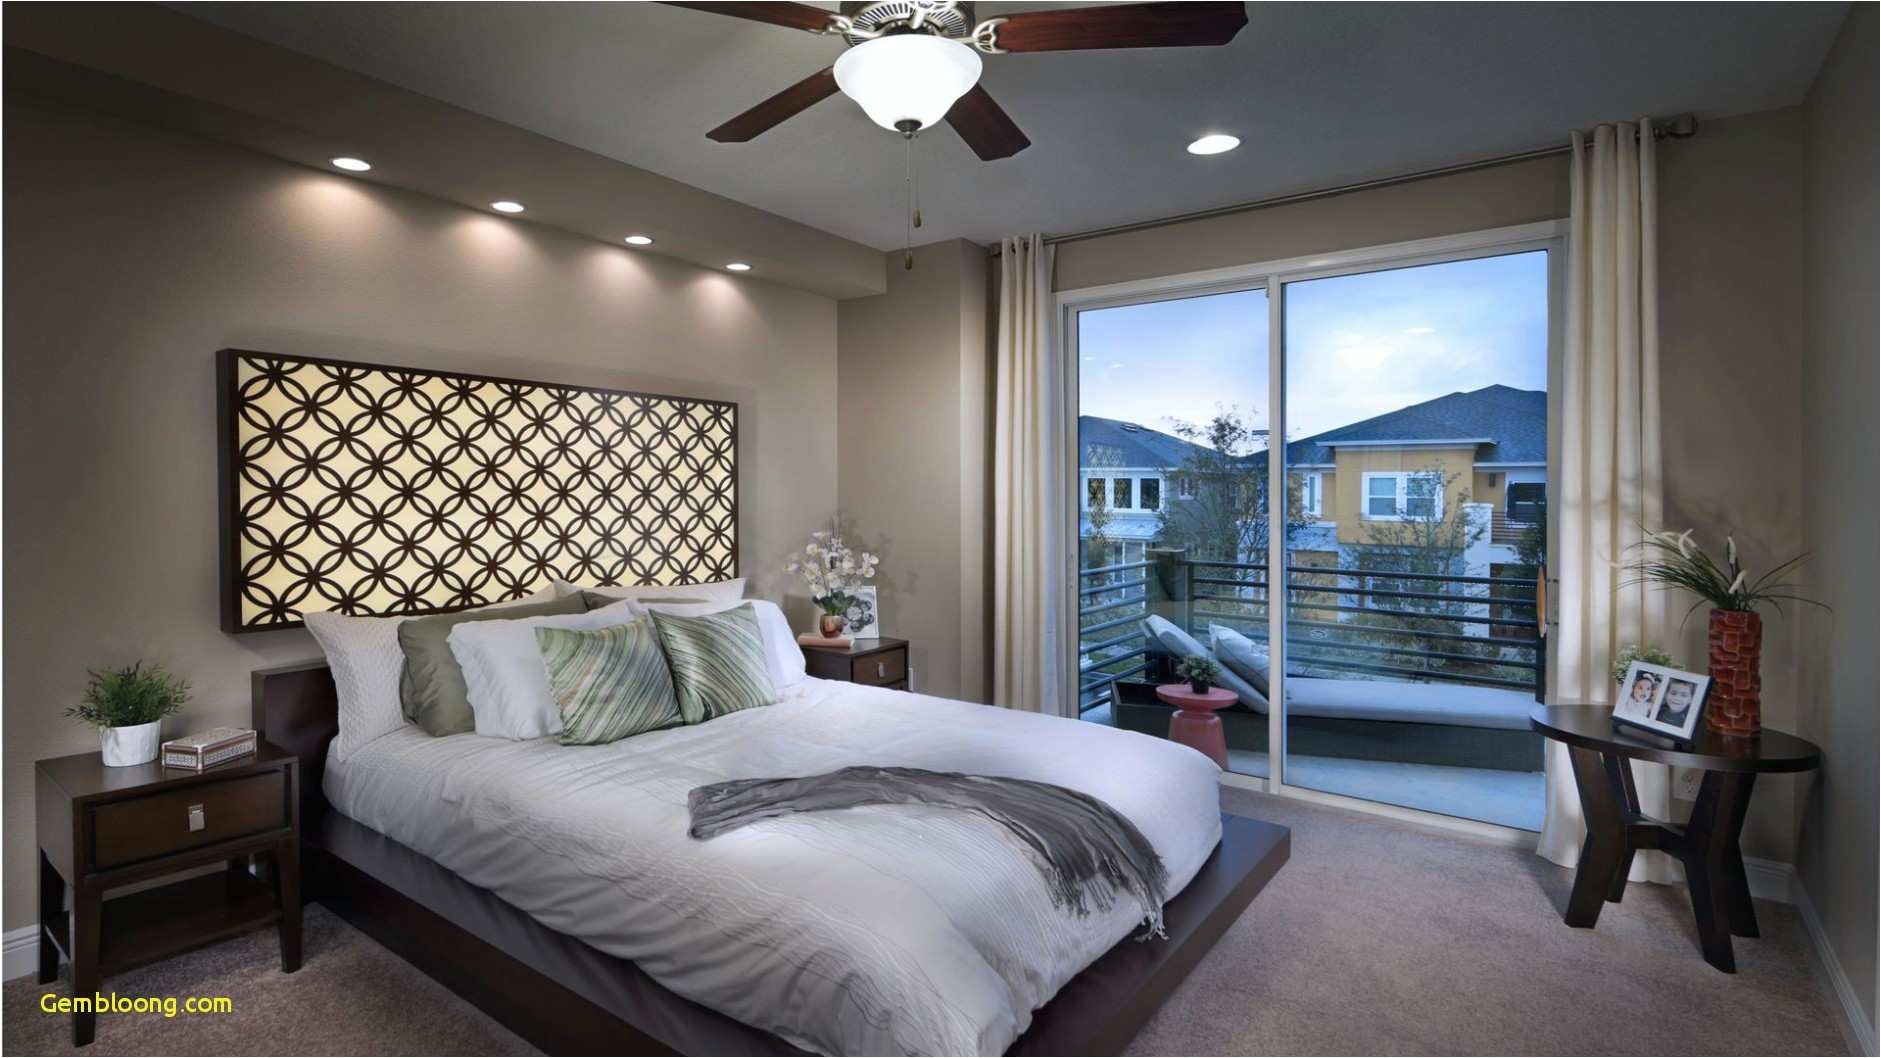 ceiling fans for bedrooms simple ceiling fan luxury bedroom bedroom ceiling bedroom ceiling 0d